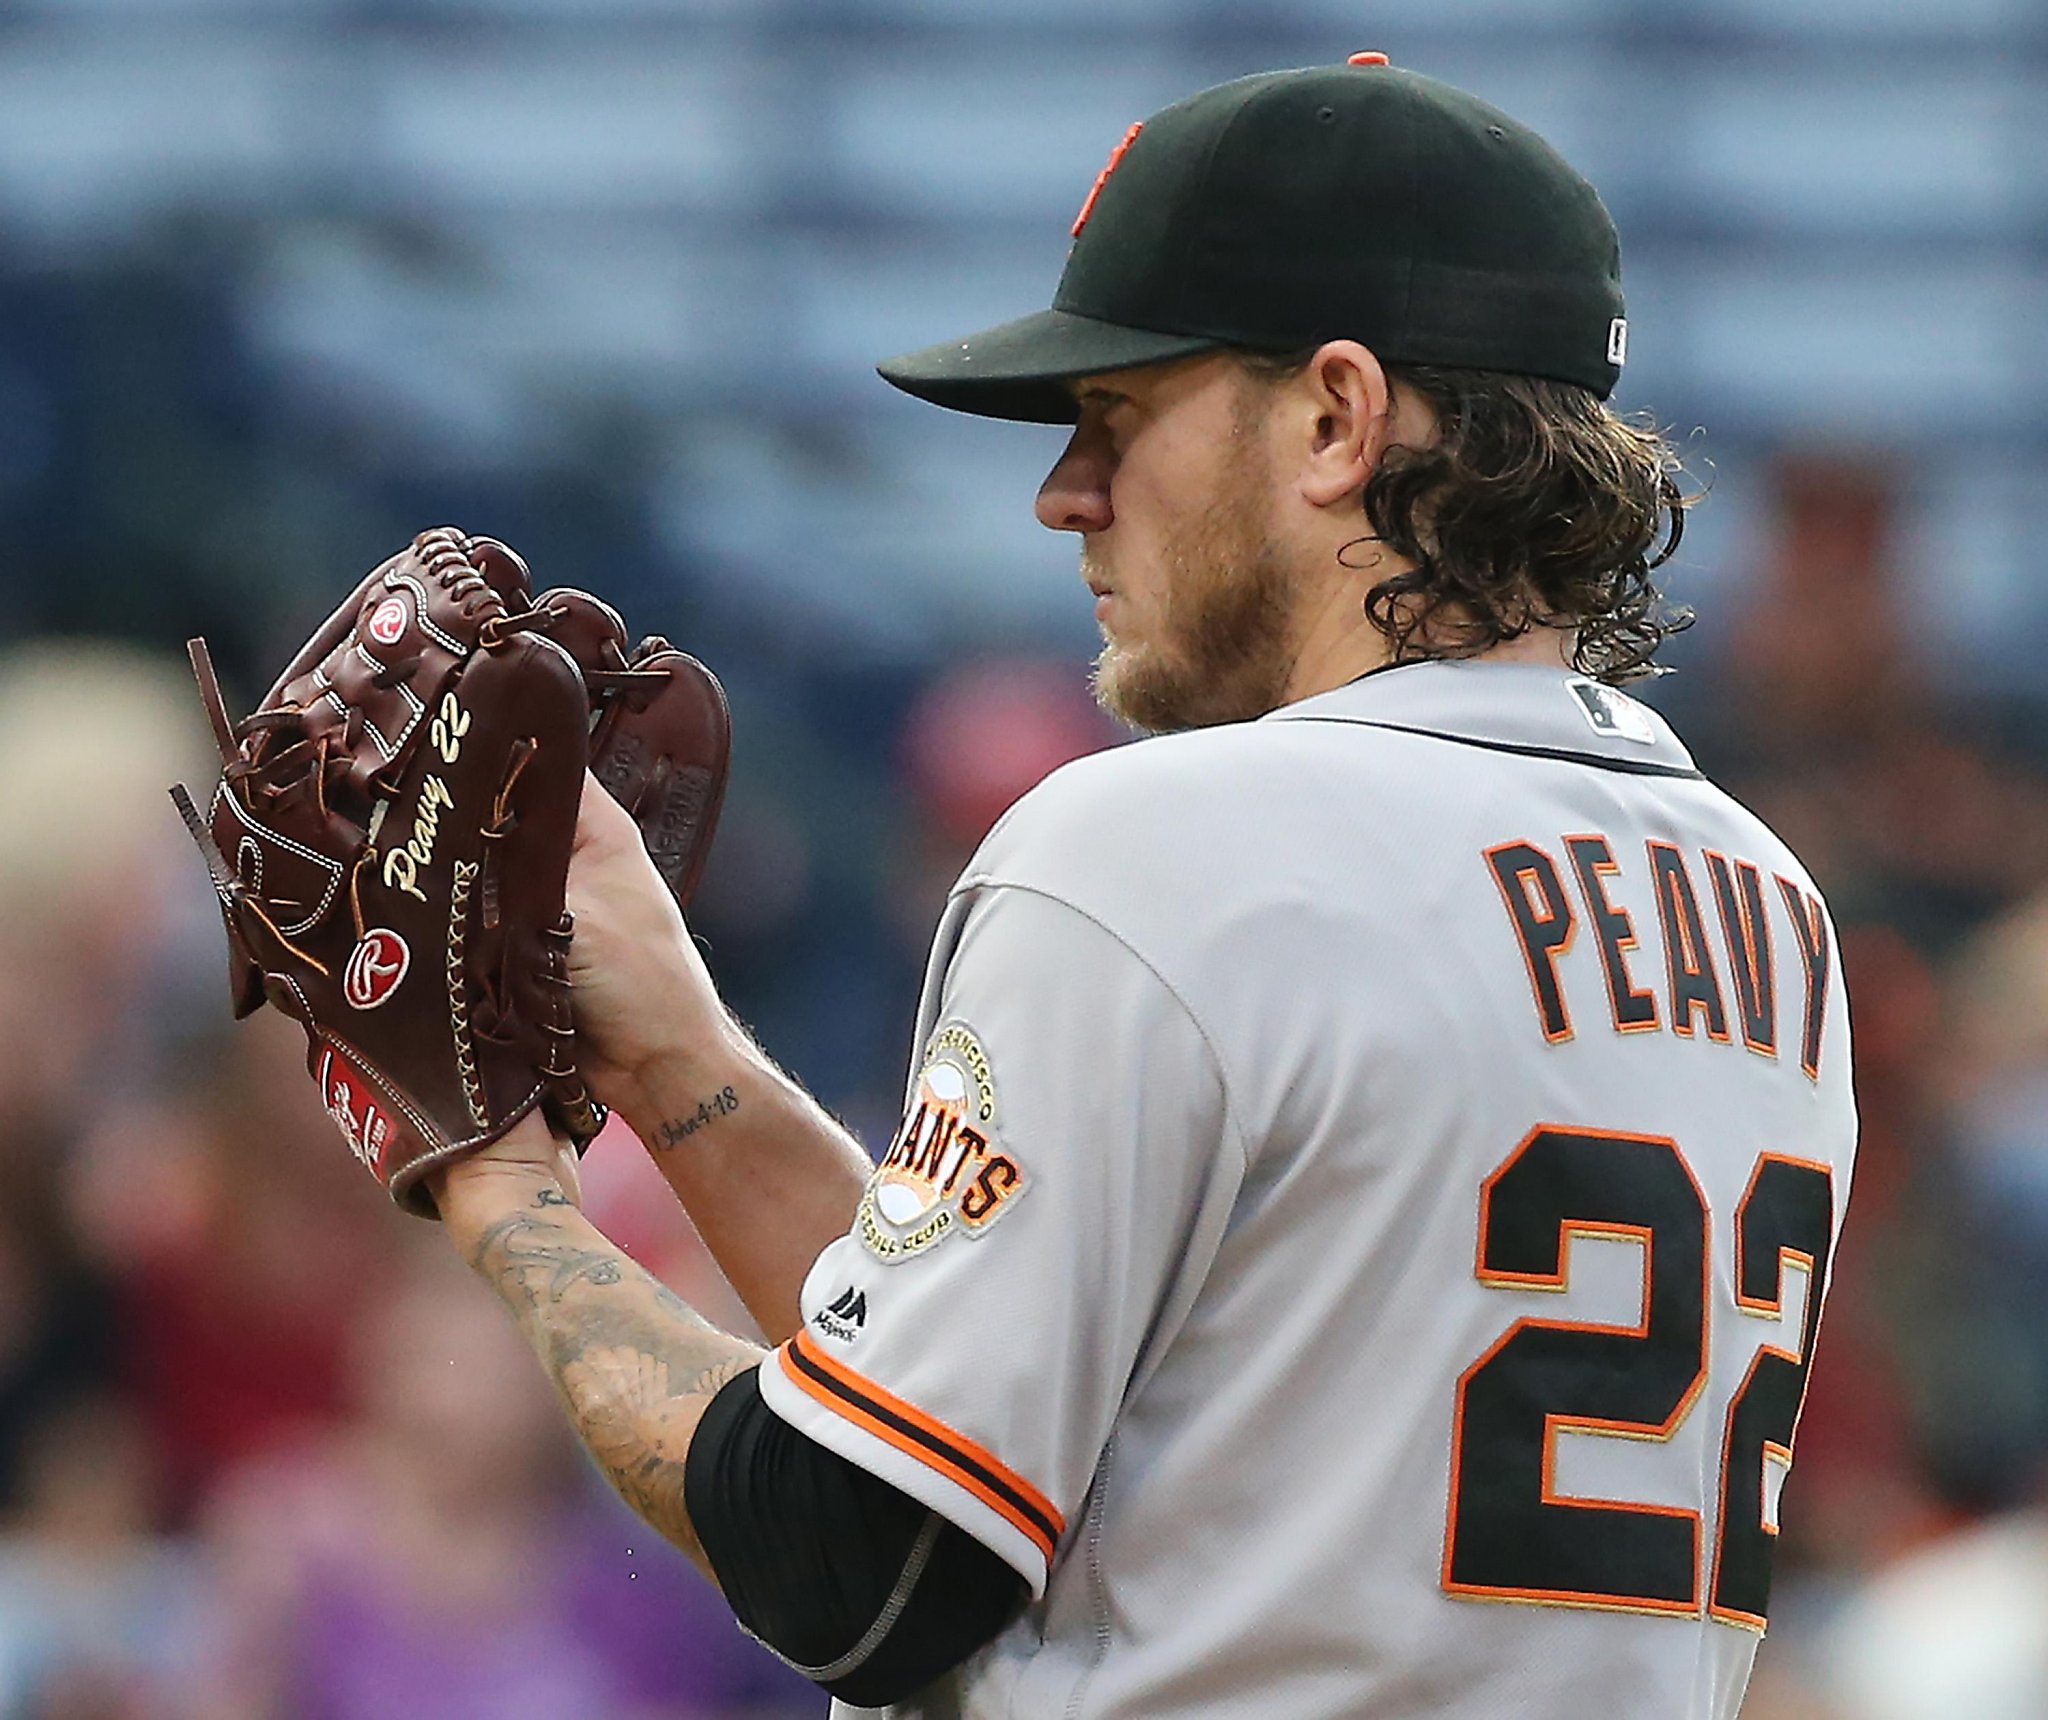 Jake Peavy plans to turn his S.F. cable car into a mobile bar